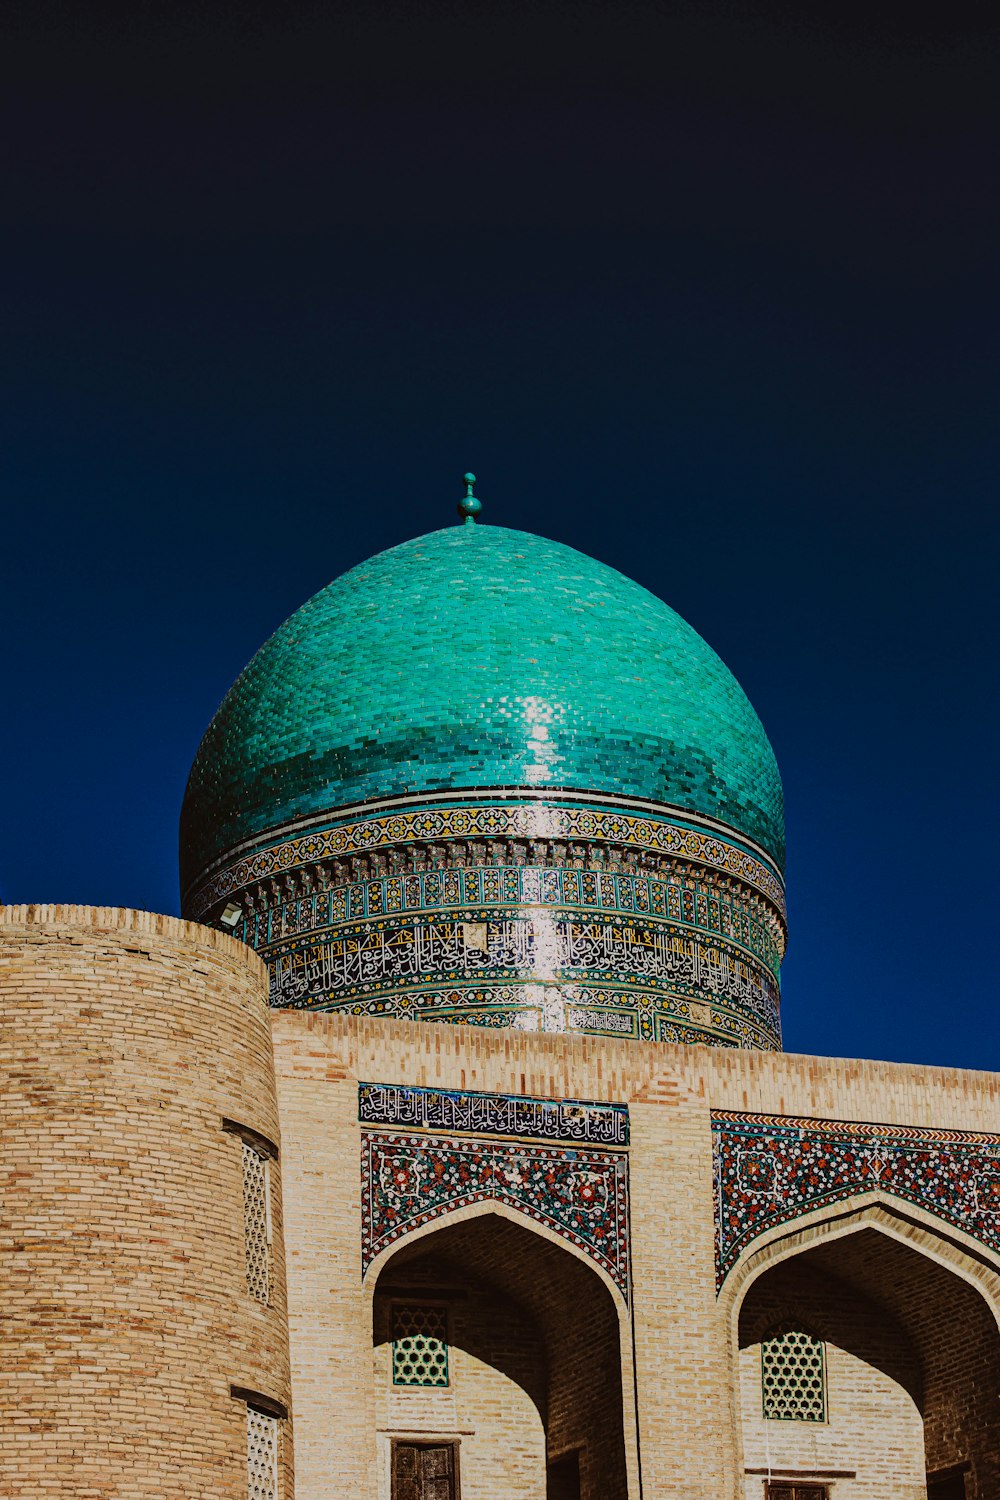 a domed building with a green dome